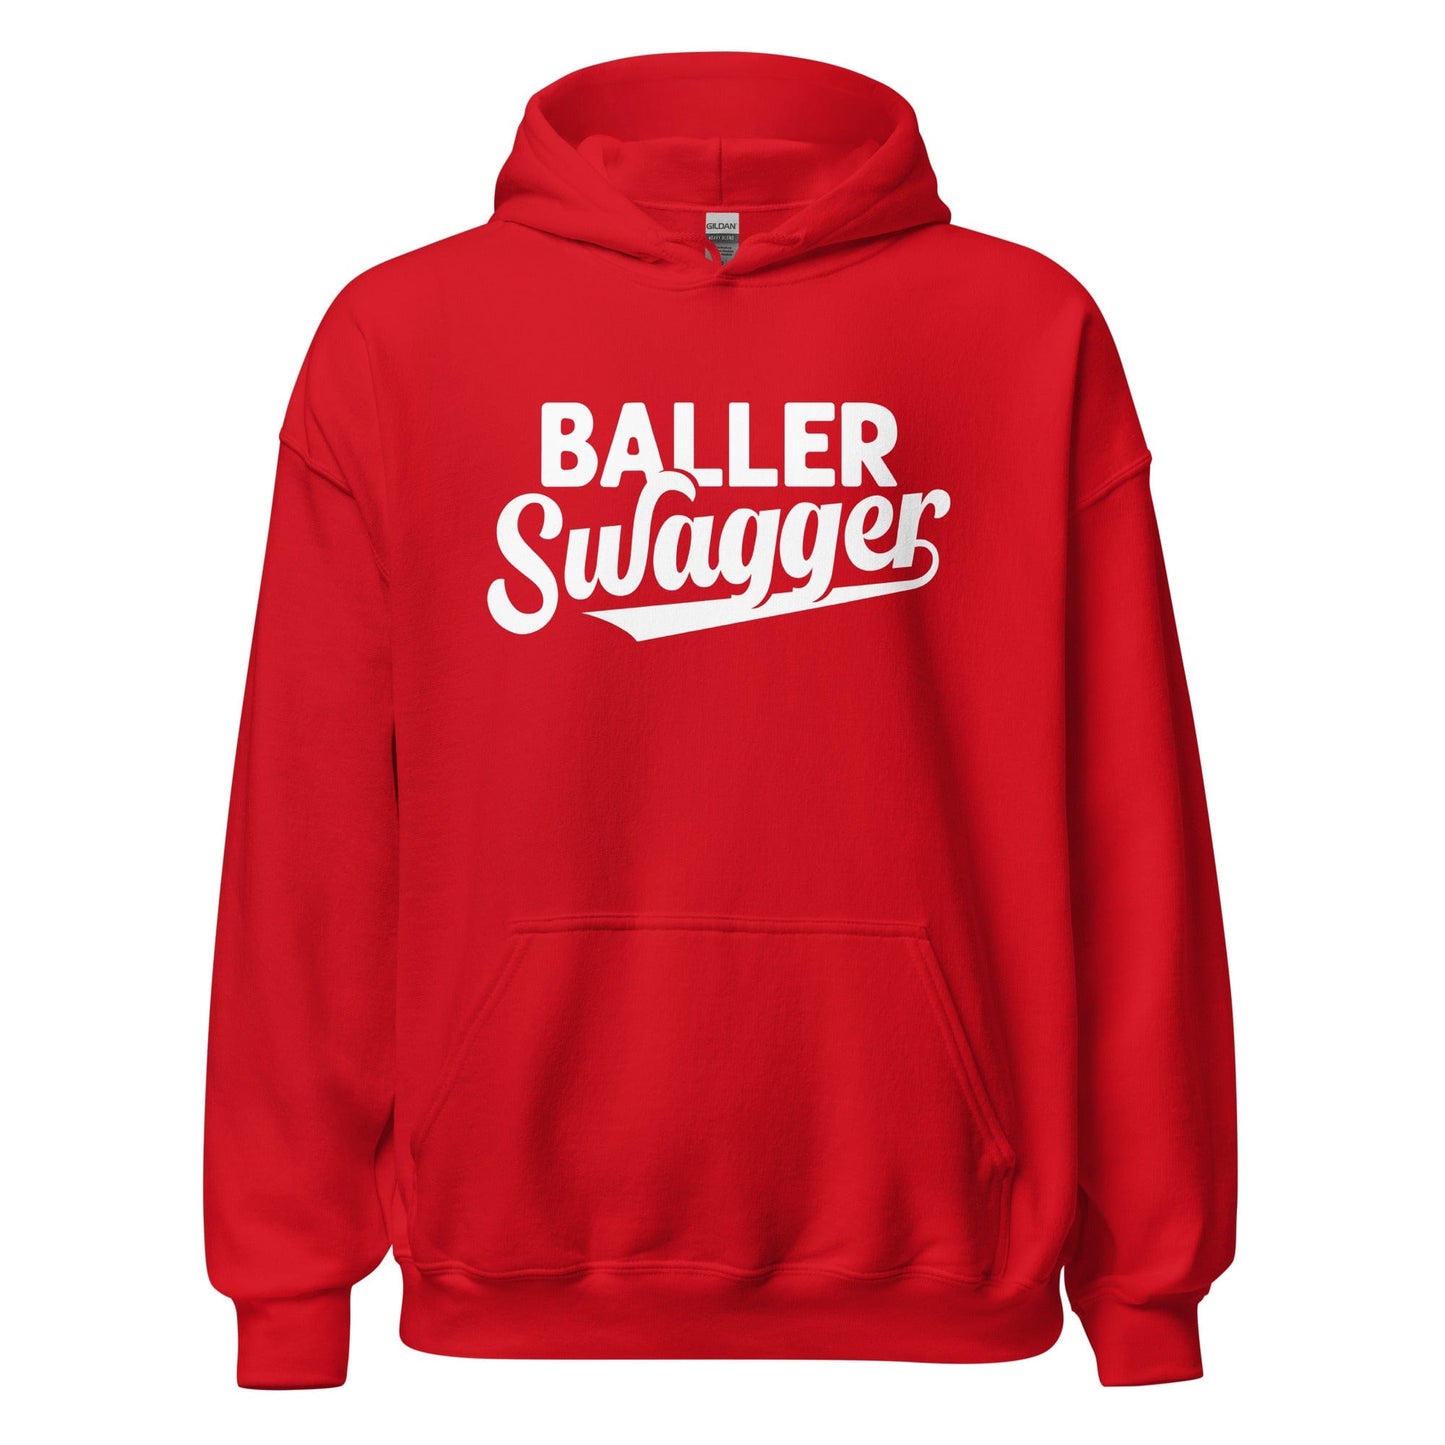 Baller Swagger - Adult Hoodie